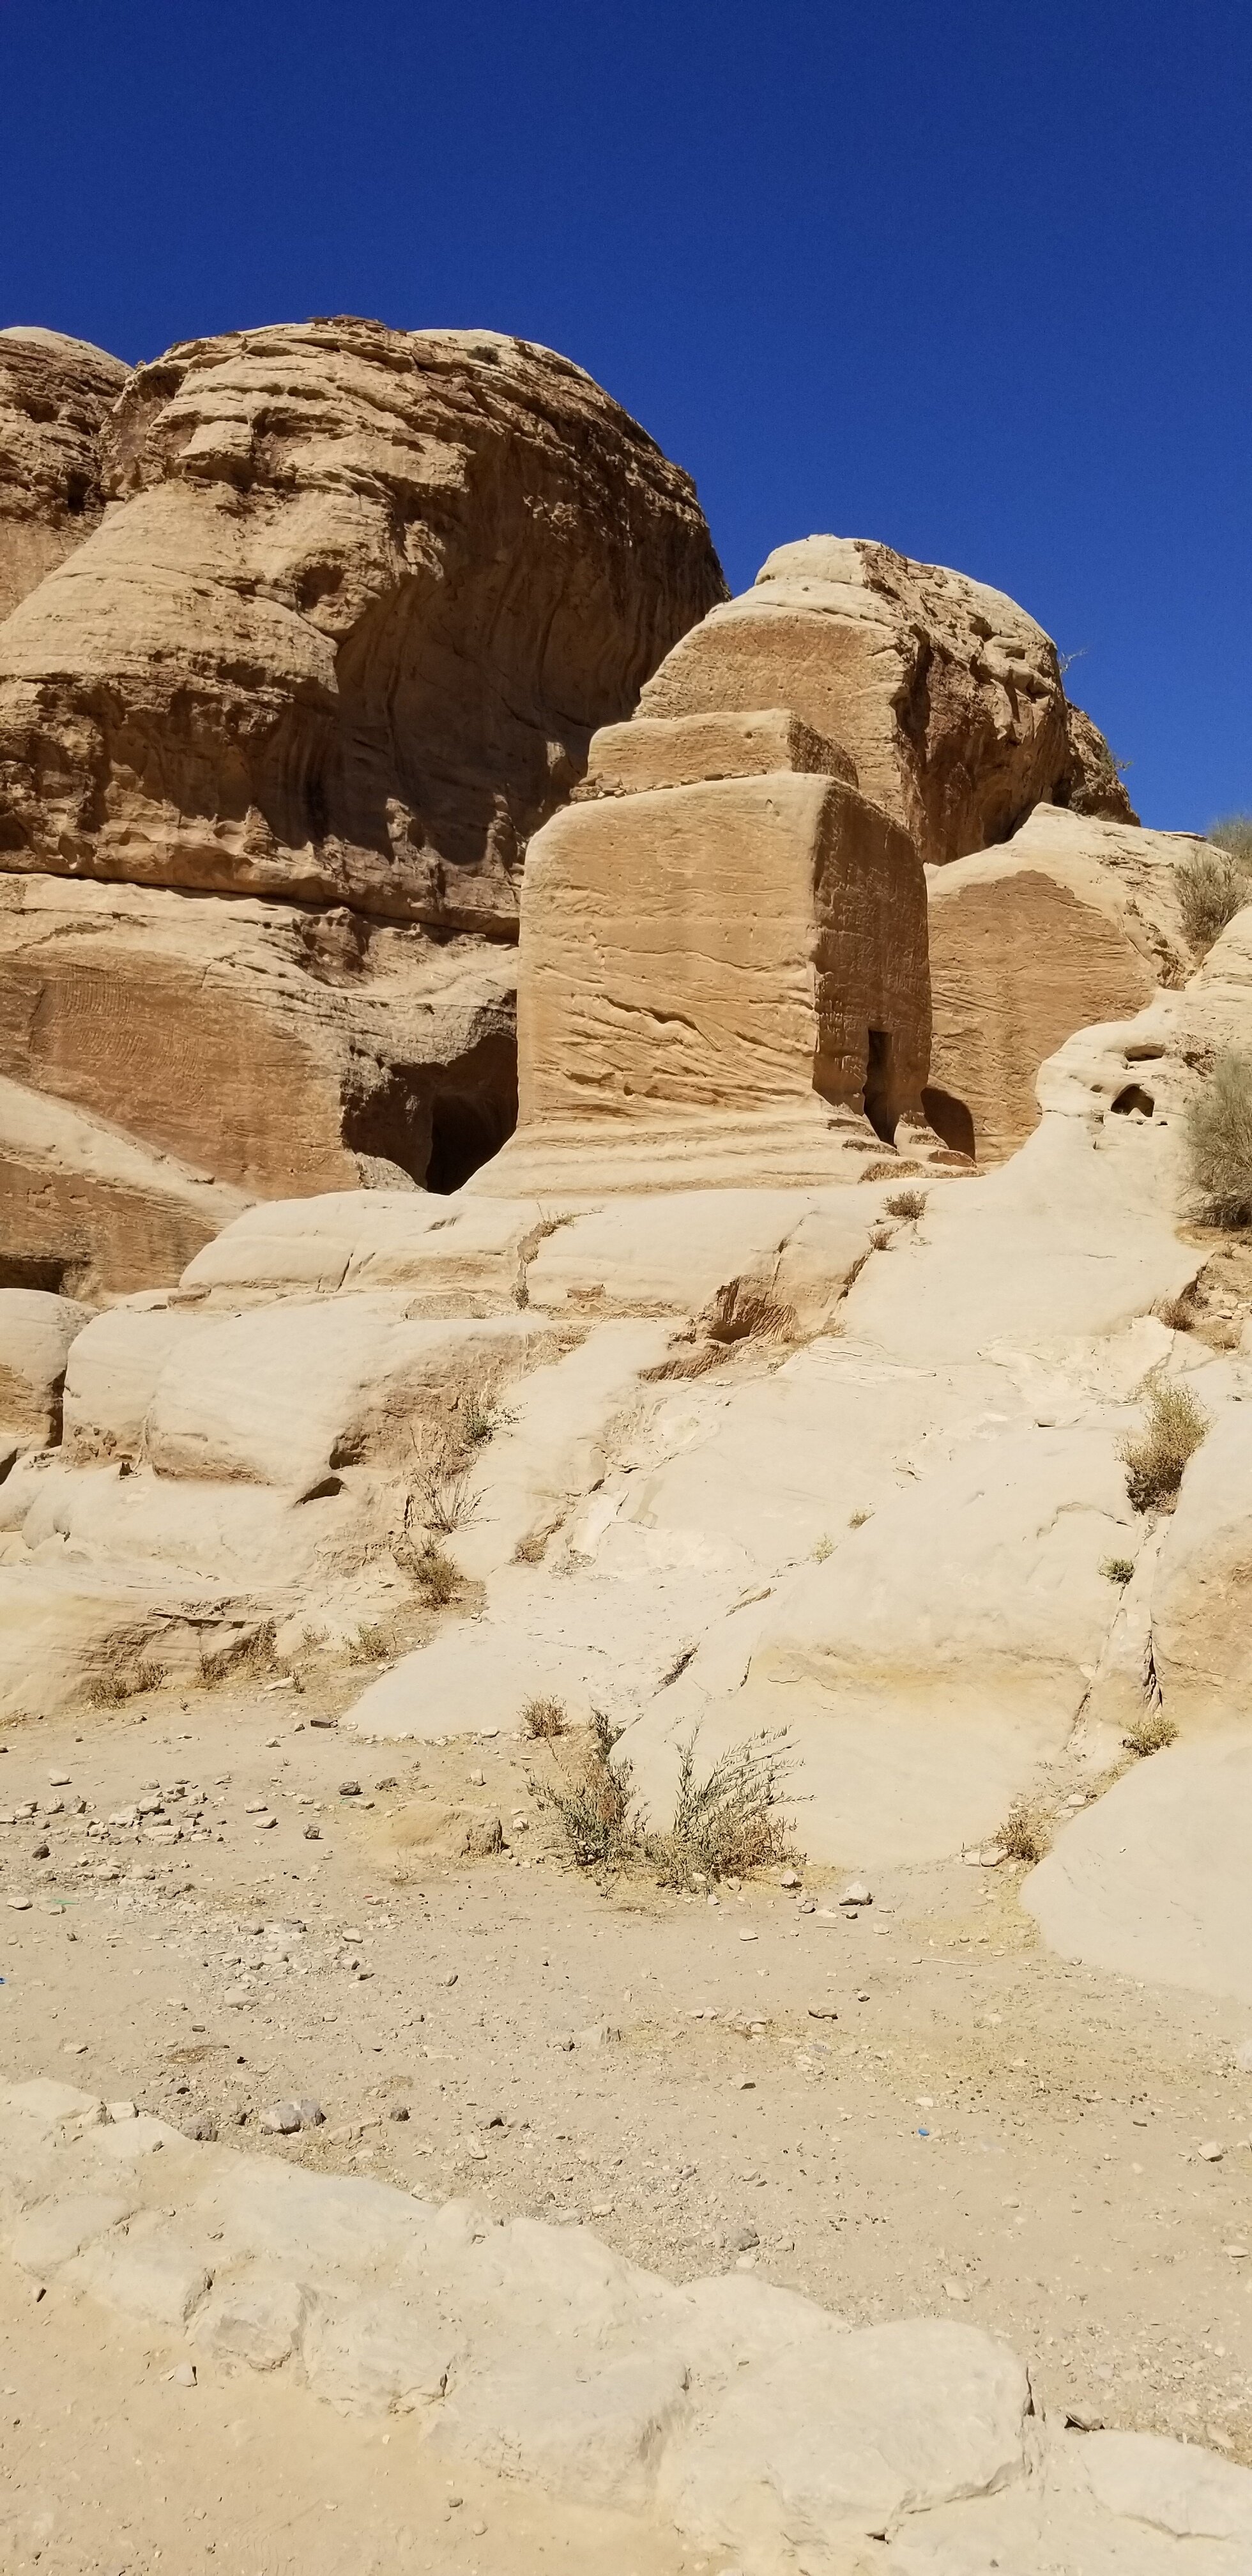  Photo of a “Djinn Box” from listener Kate Carlson taken when visiting Jordan while on active duty with the US Army in 2019.  These stone boxes are found on the trail through the ancient Nabatean city of Petra and Kate was told they were carved to tr